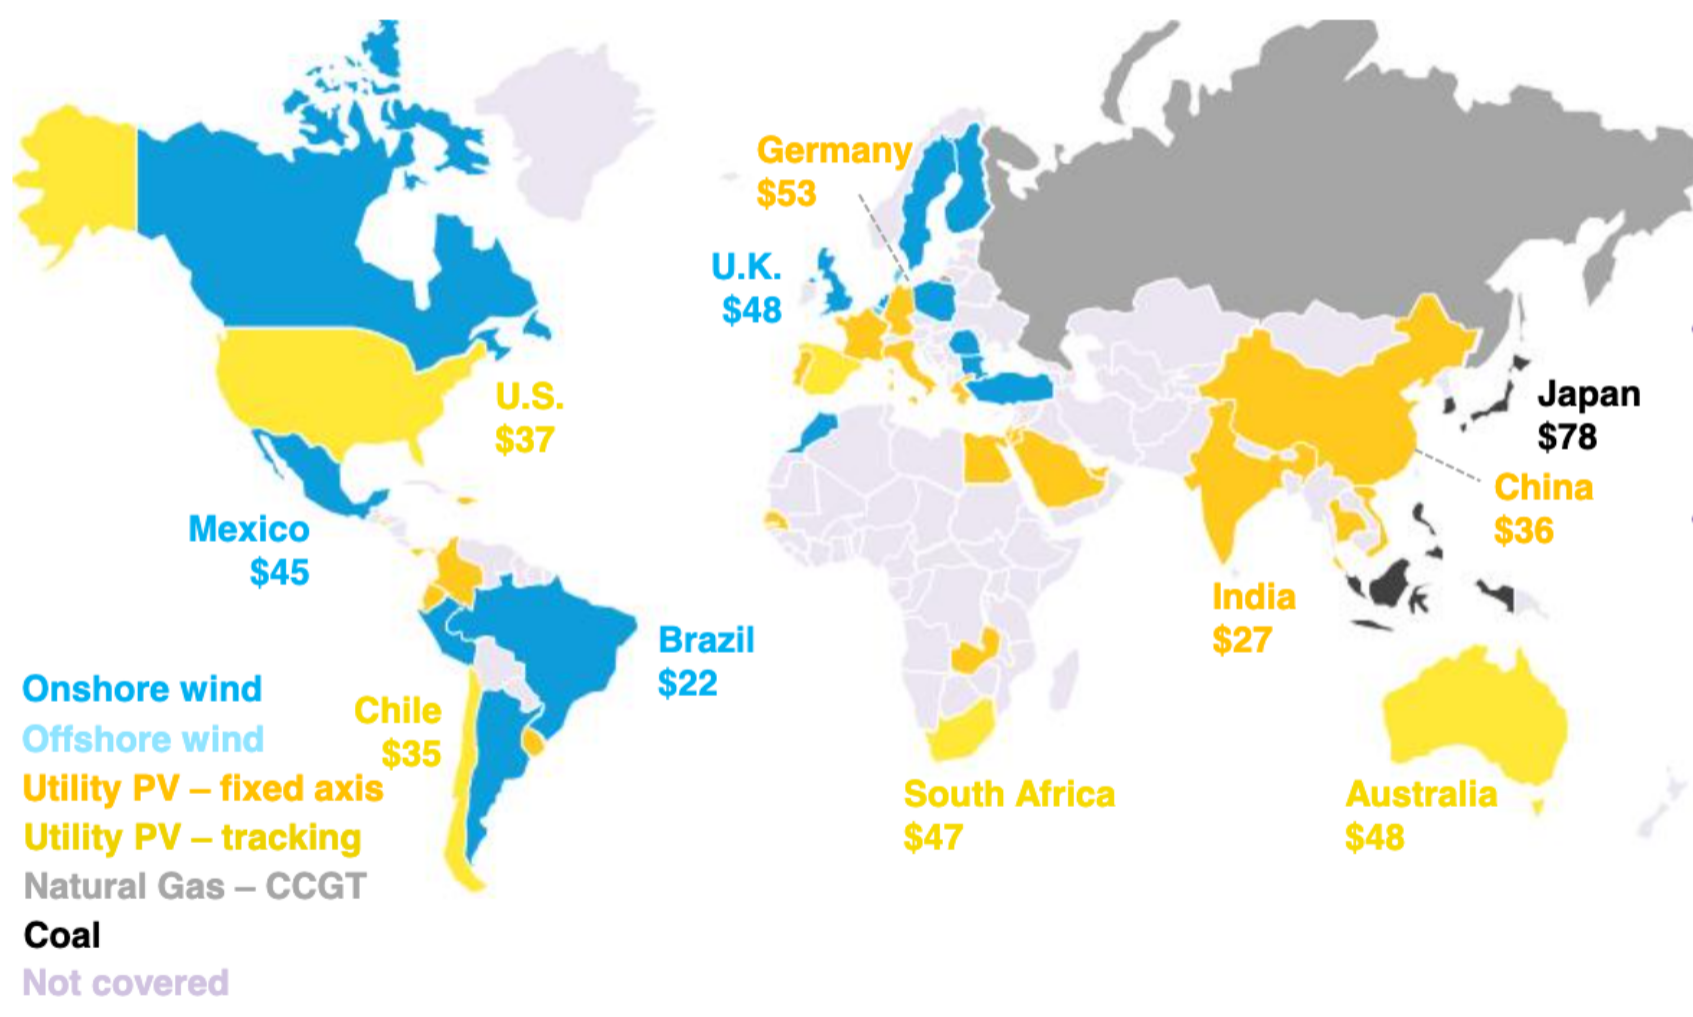 Cheapest new electricity sources